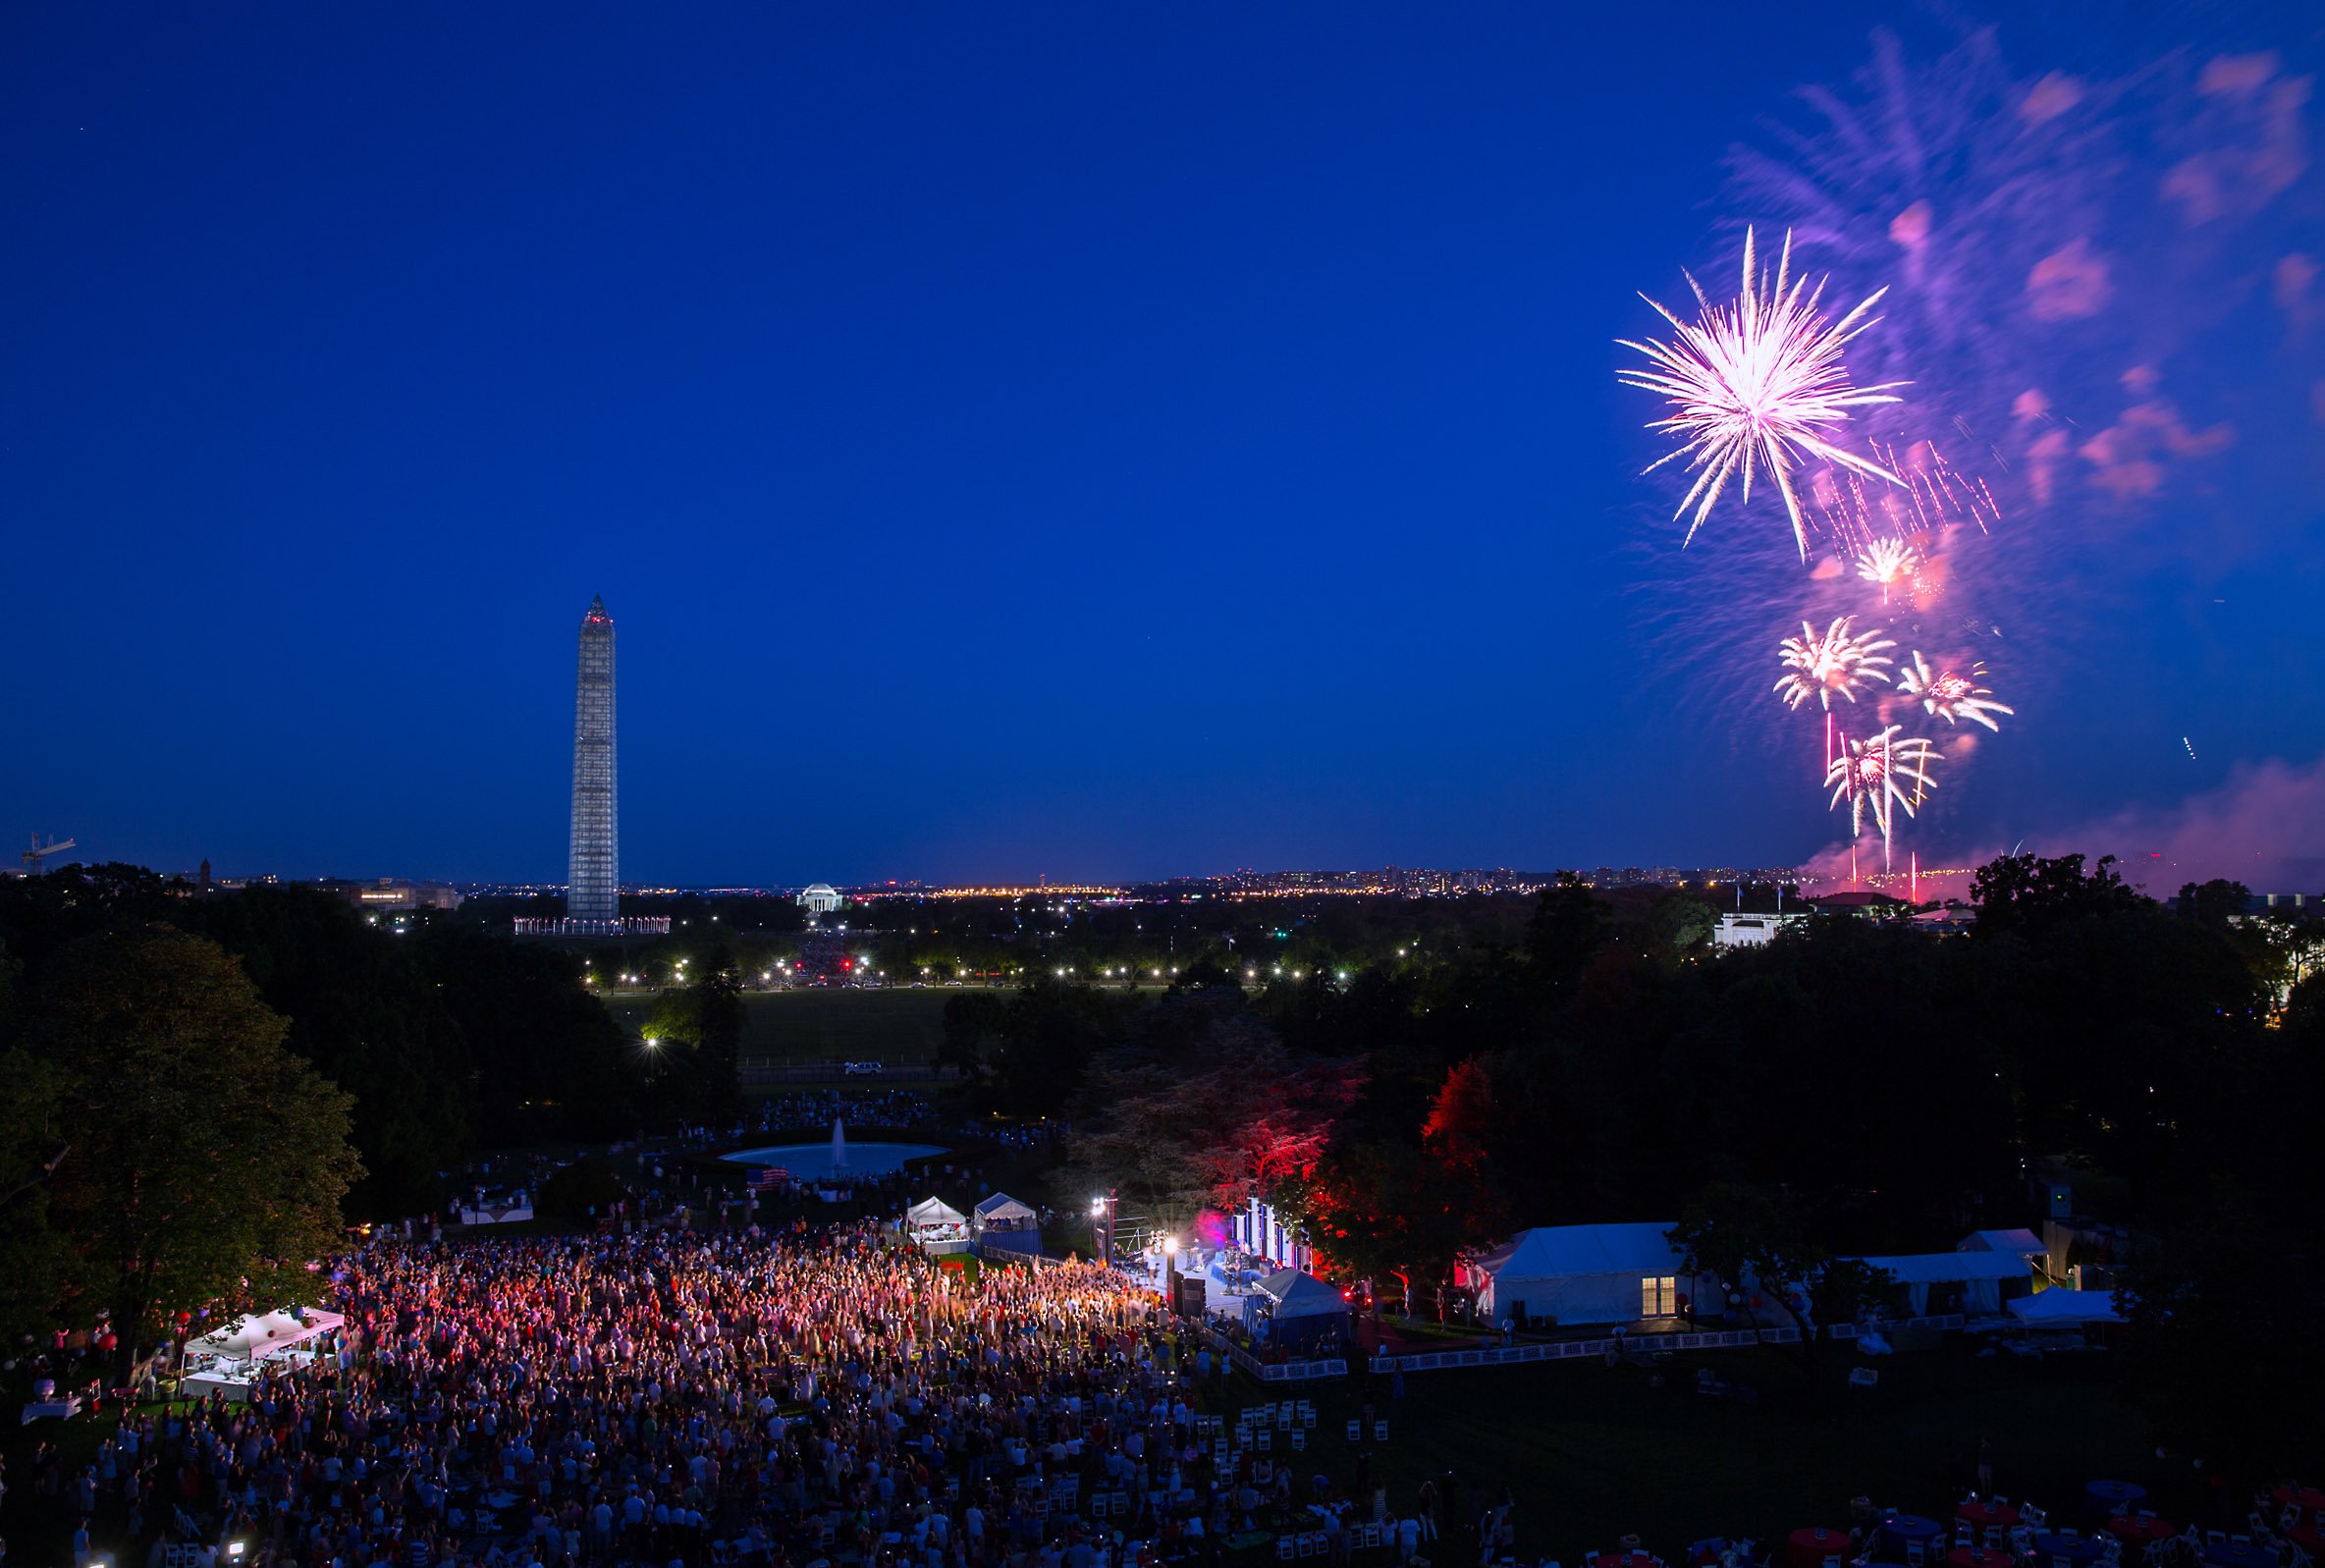 President Barack Obama and First Lady Michelle Obama watch fireworks from the roof of the White House during a Fourth of July celebration for military families and White House Staff on the South Lawn, July 4, 2013. (Official White House Photo by Pete Souza)